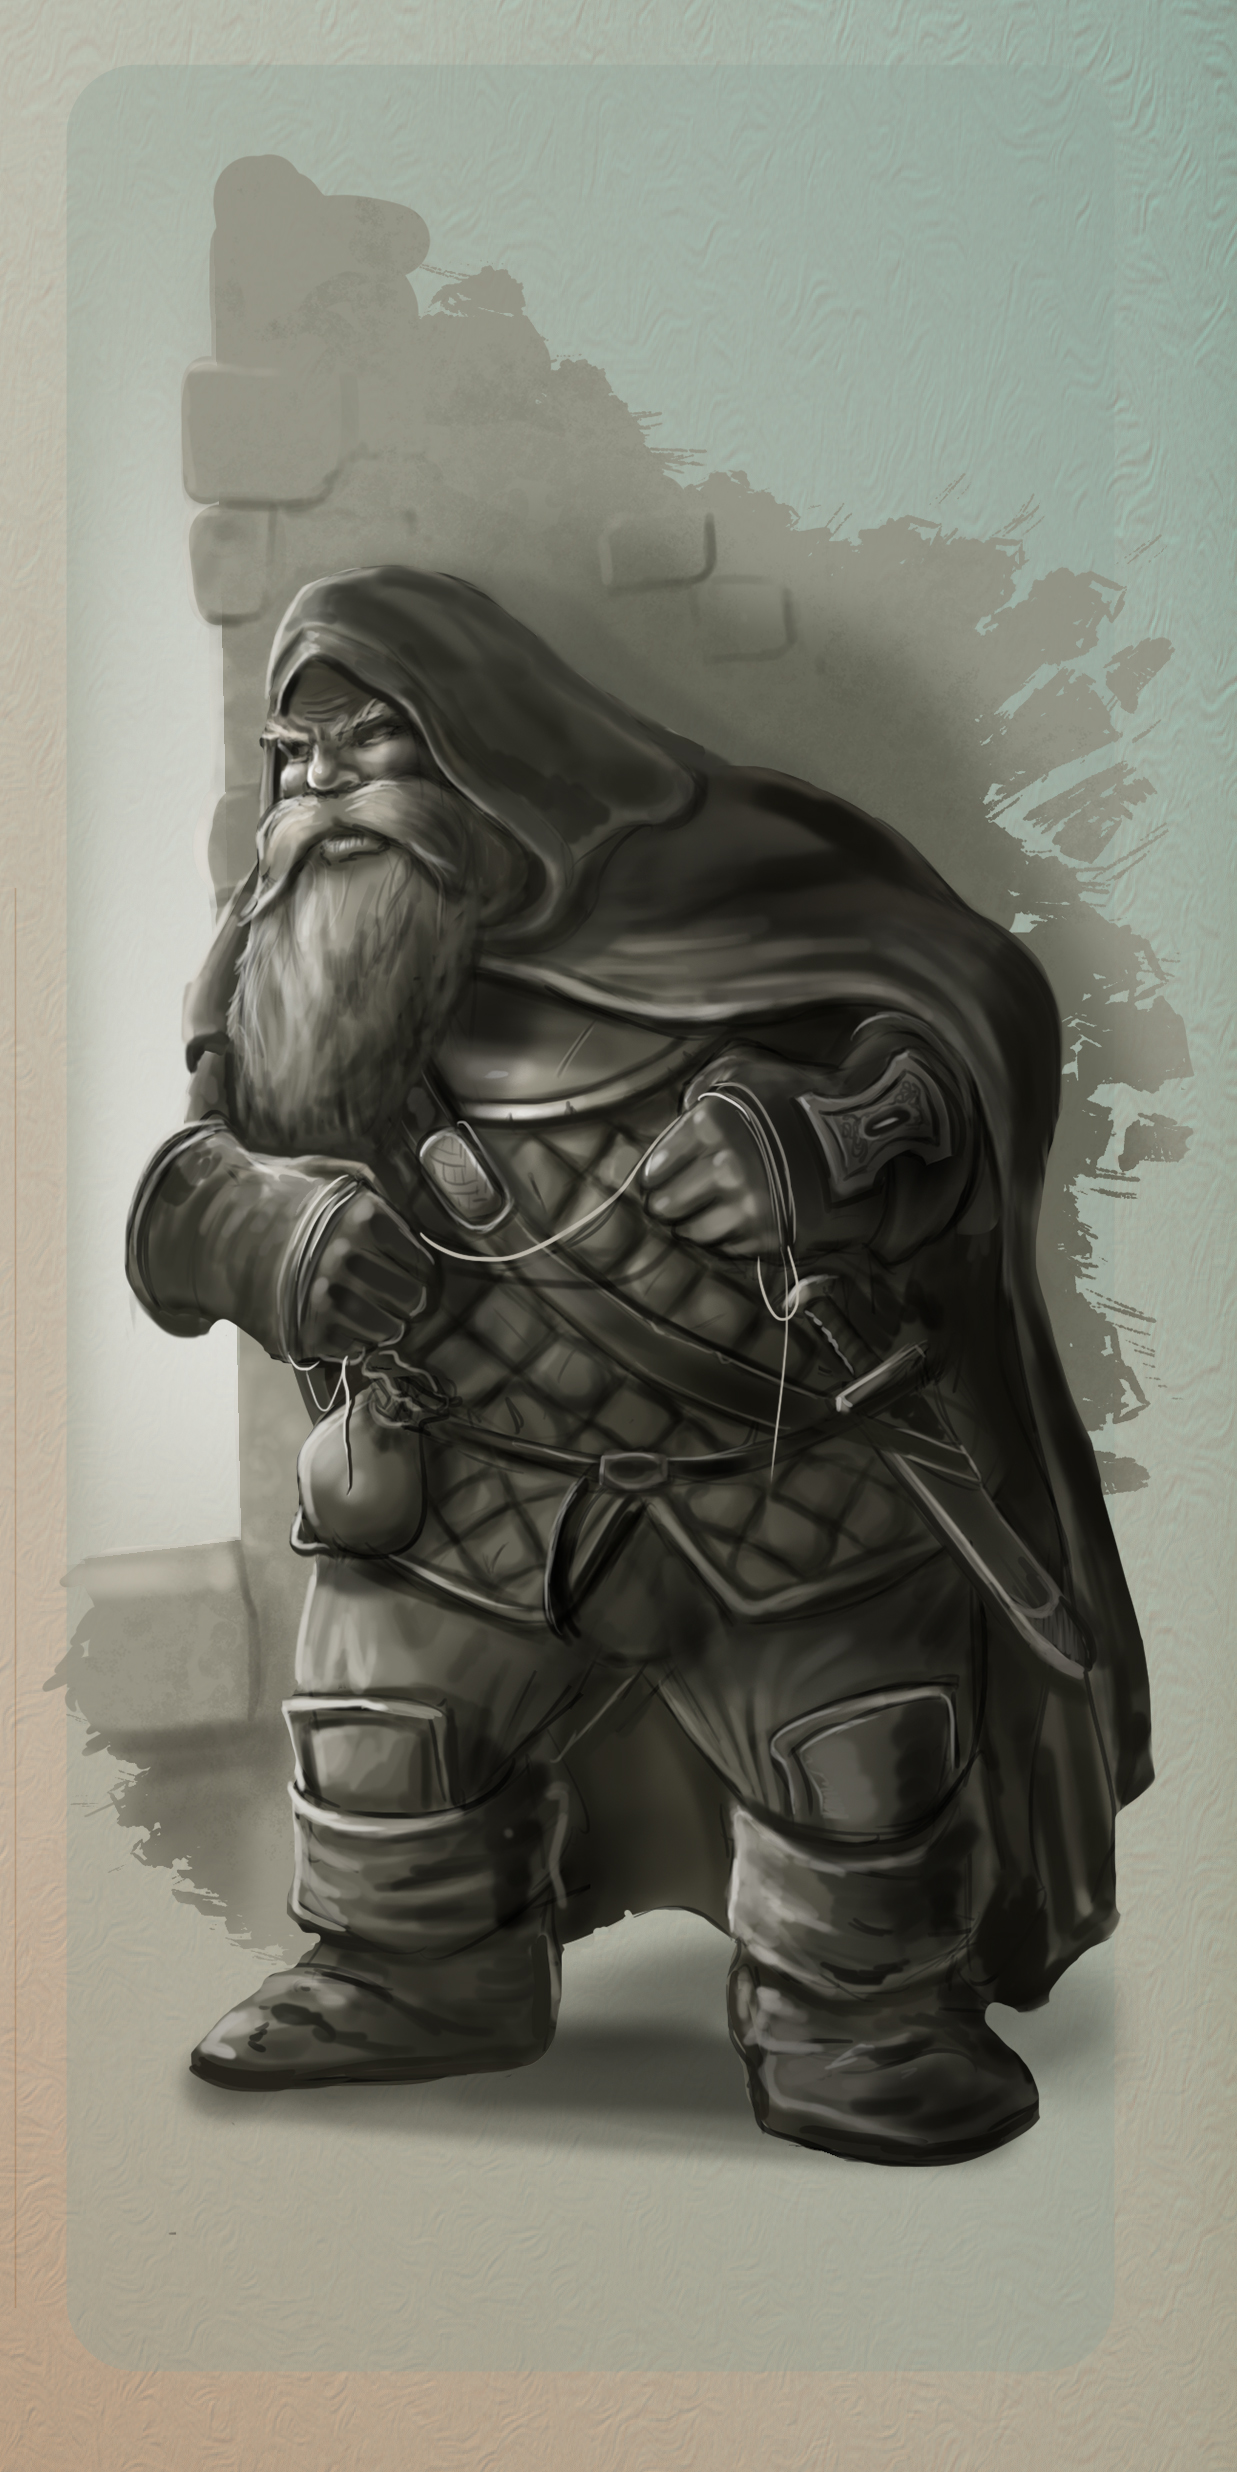 A TTRPG dungeons and dragons dwarf assassin fantasy character portrait by the noble artist